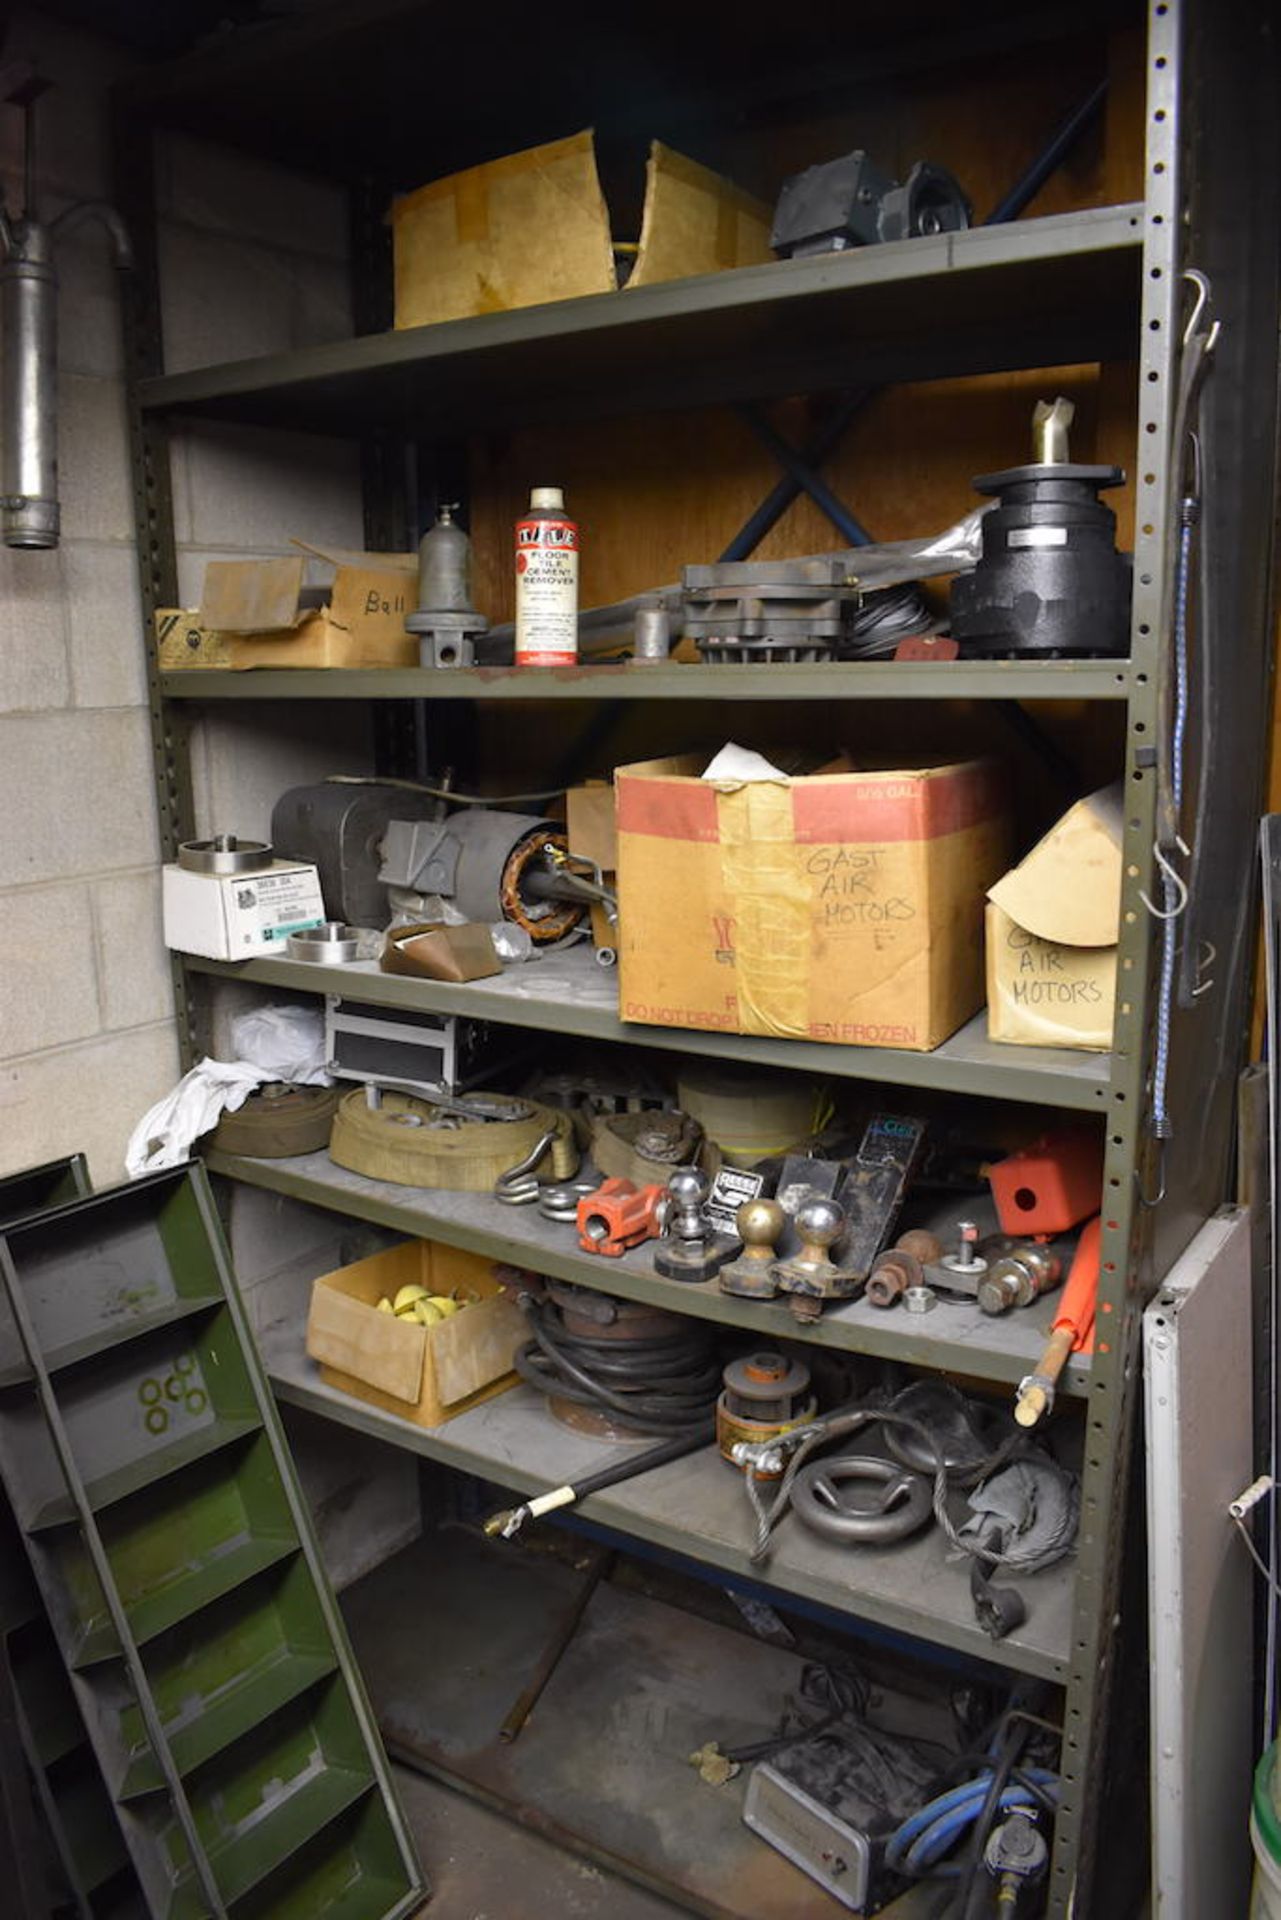 SHELVING & CONTENTS IN AREA, INCLUDING: Bearings; Casters, Assorted Nuts & Bolts - Image 7 of 8